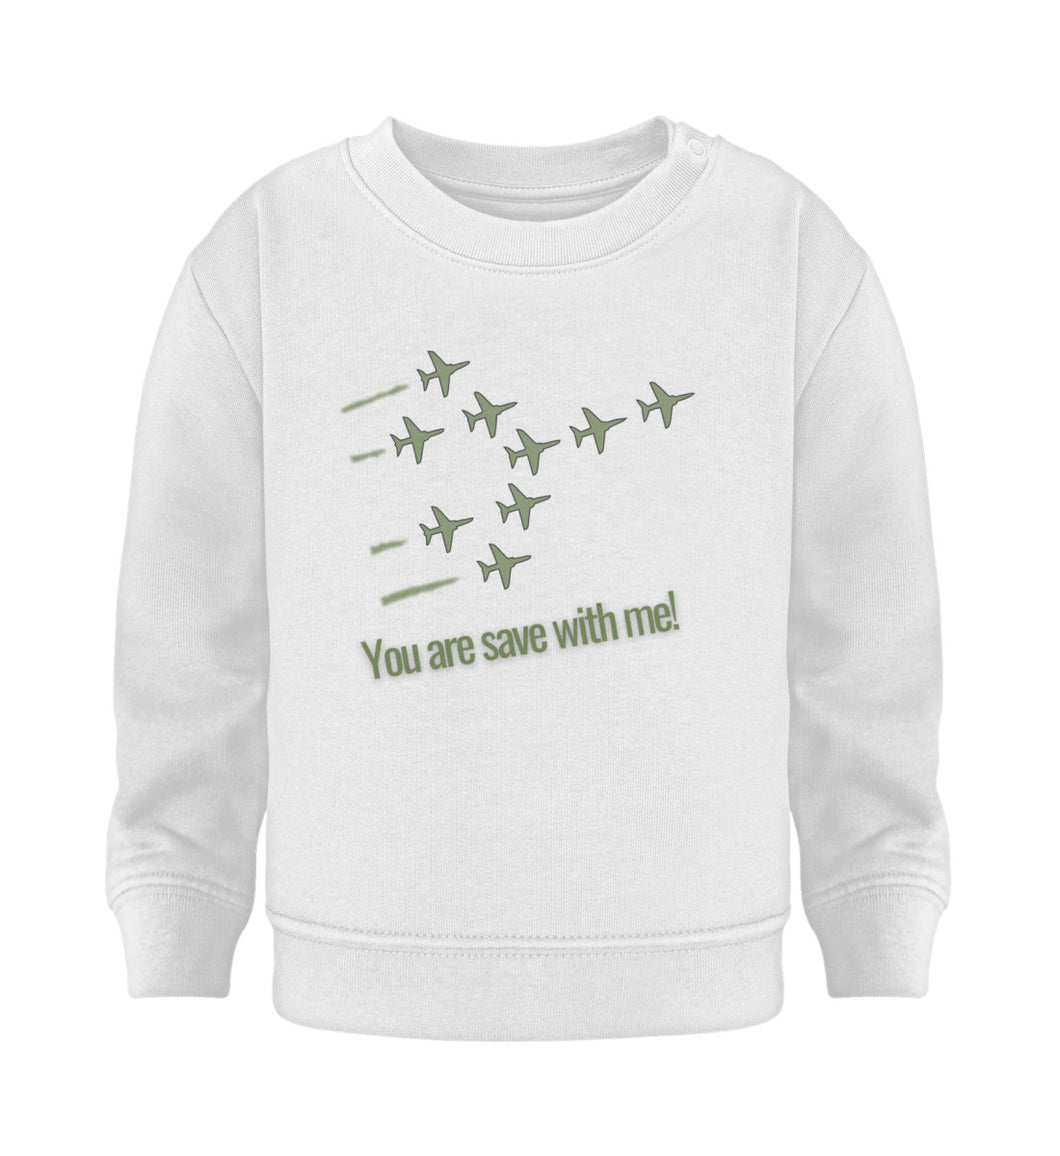 You are save with me! - Baby Pullover